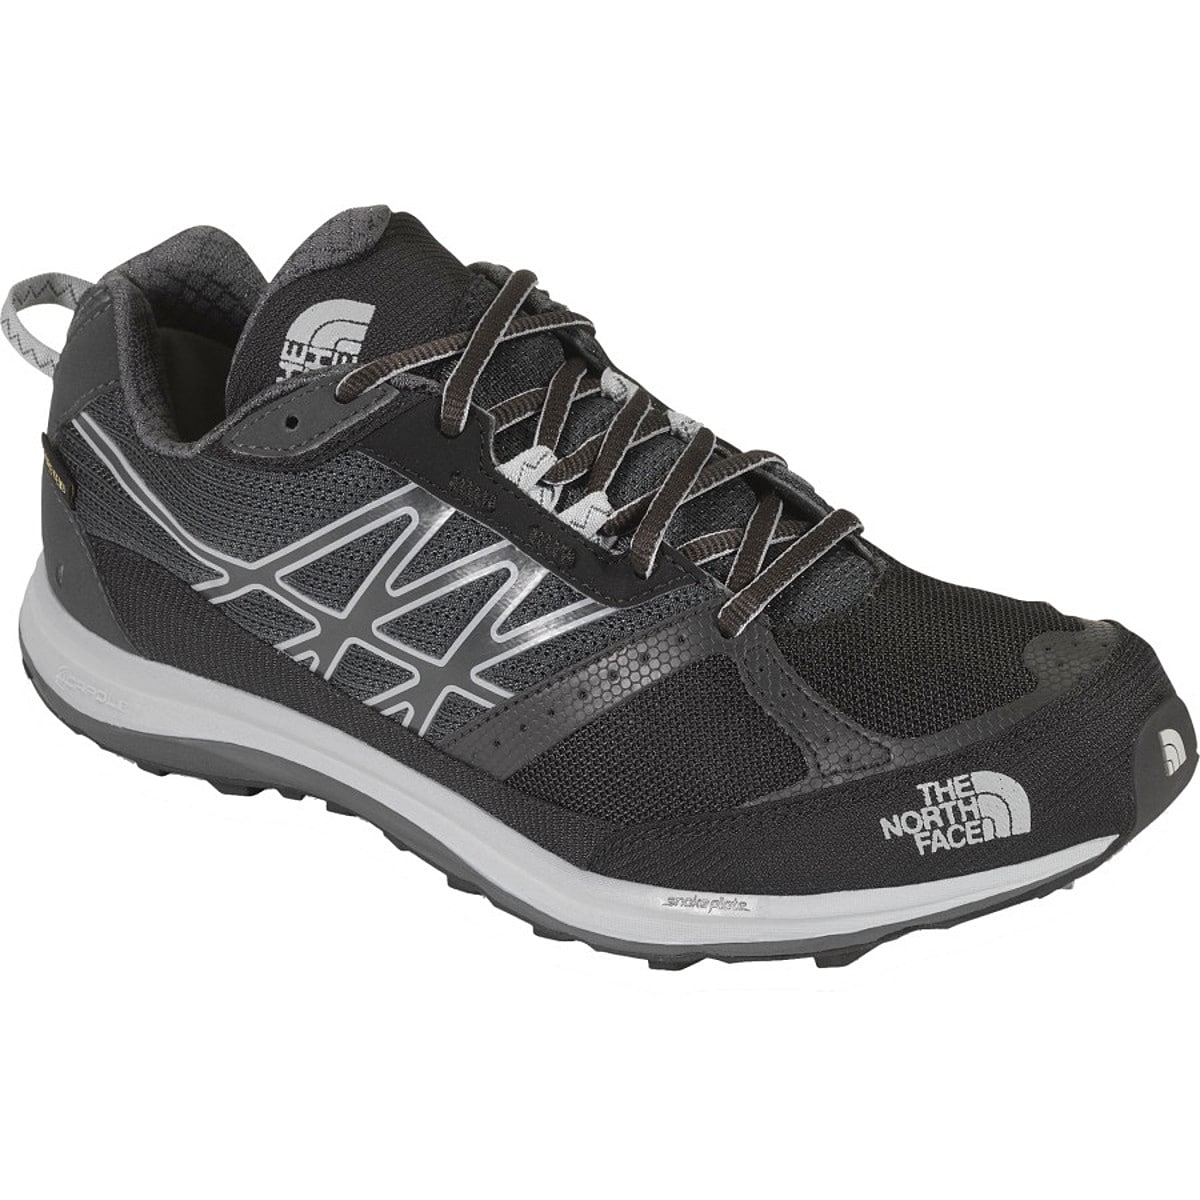 The North Face Ultra Guide Gore-Tex Trail Running Shoe - Men's - Footwear